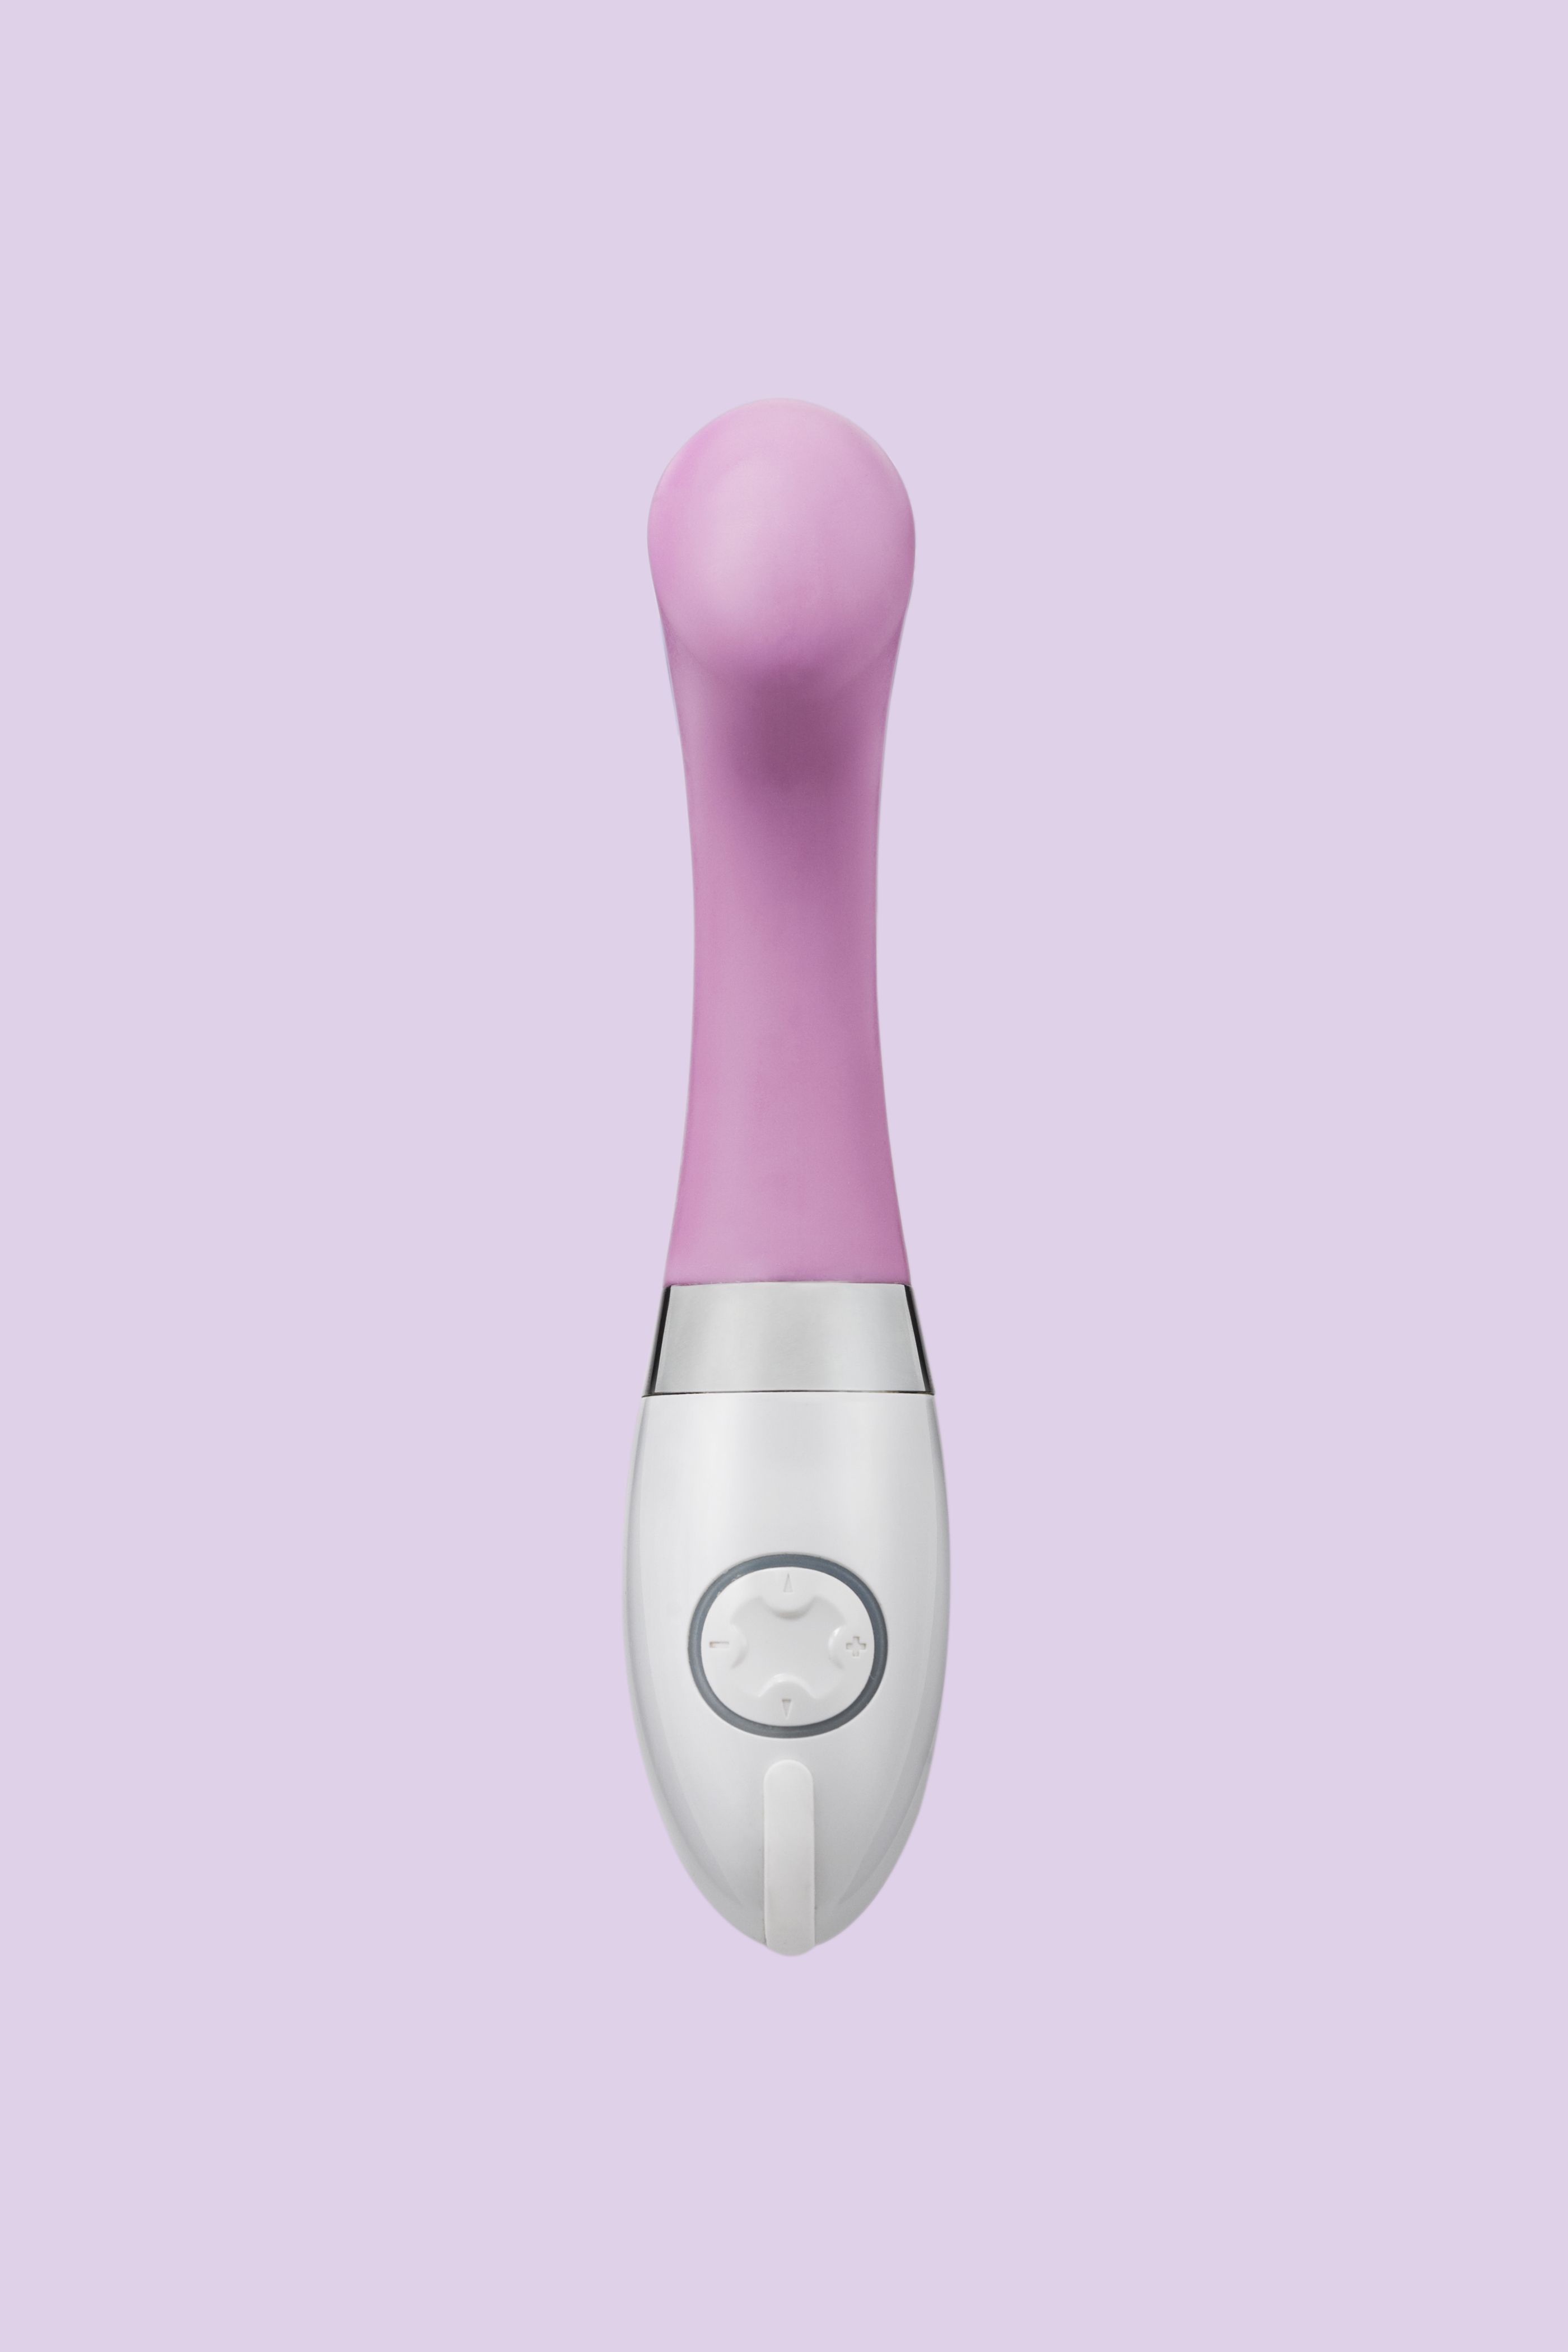 Sexplain It My Girlfriend Likes Her Vibrator Better Than picture